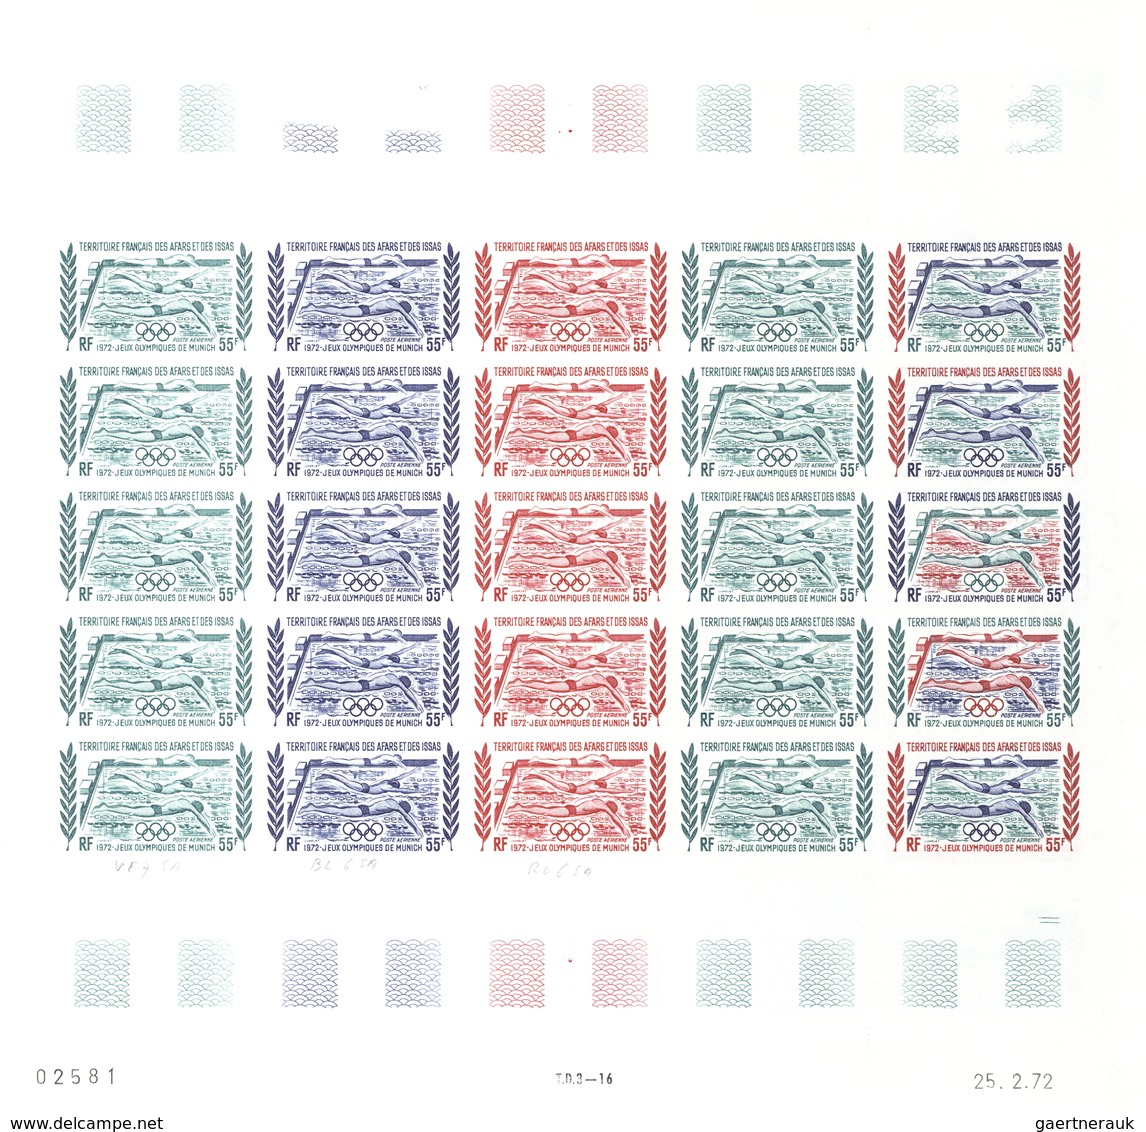 Afar und Issa: 1969/1977, IMPERFORATE COLOUR PROOFS, MNH collection of 52 complete sheets (=1.200 pr